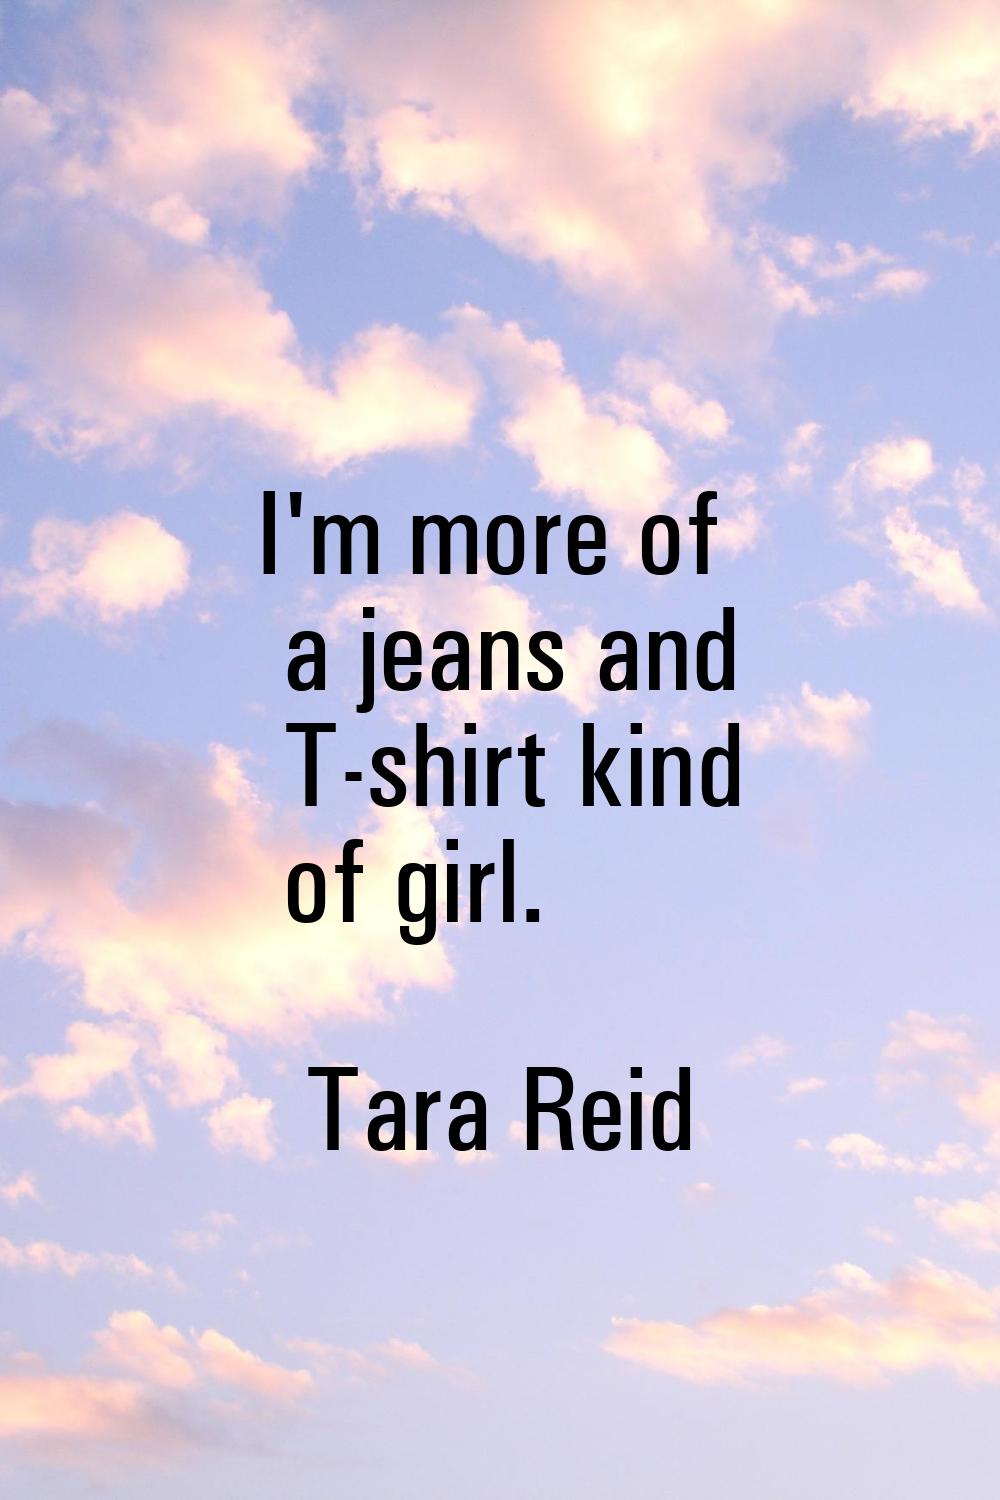 I'm more of a jeans and T-shirt kind of girl.